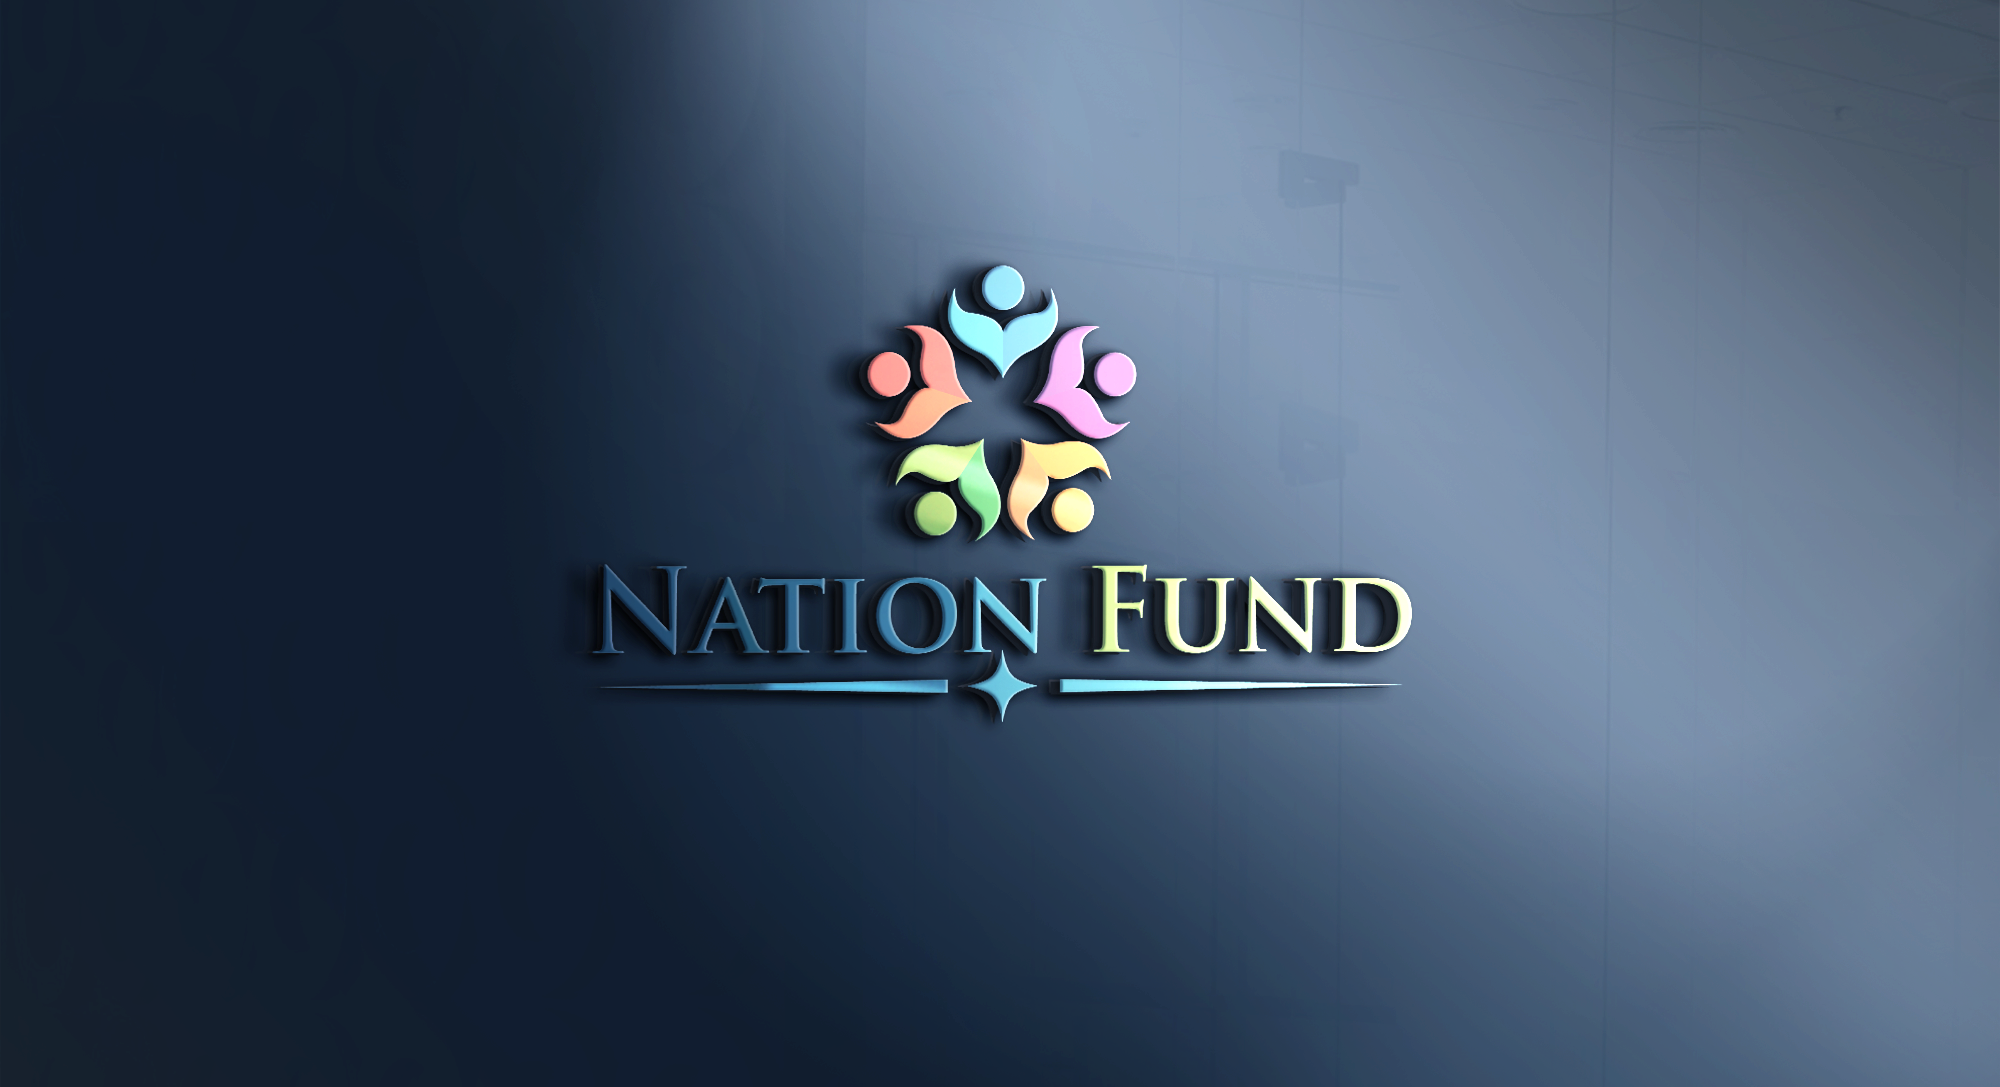 Welcome to NationFund